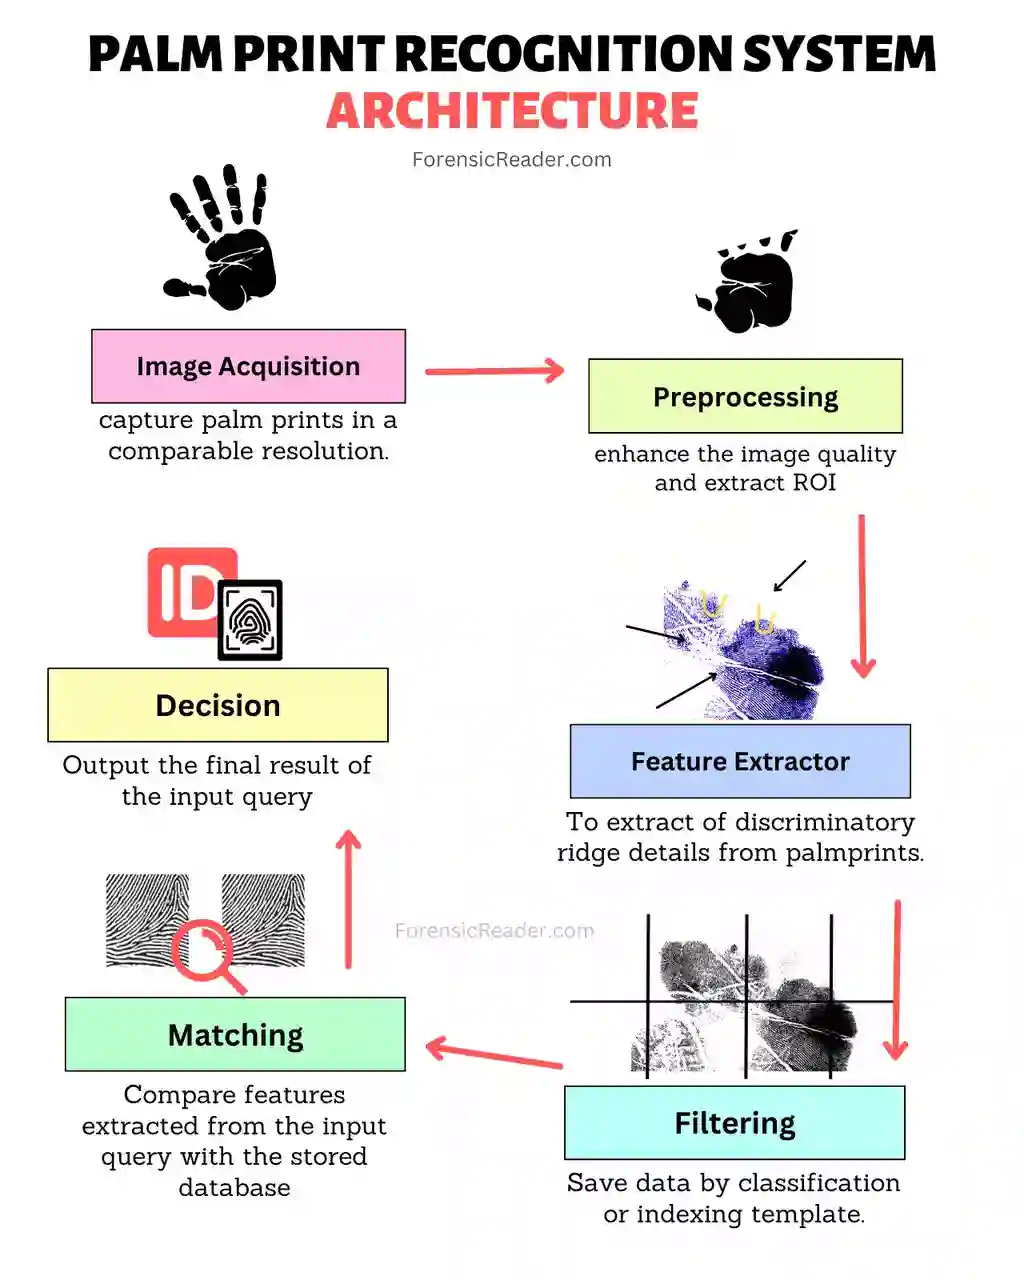 How Palm Print Recognition System Work and architecture